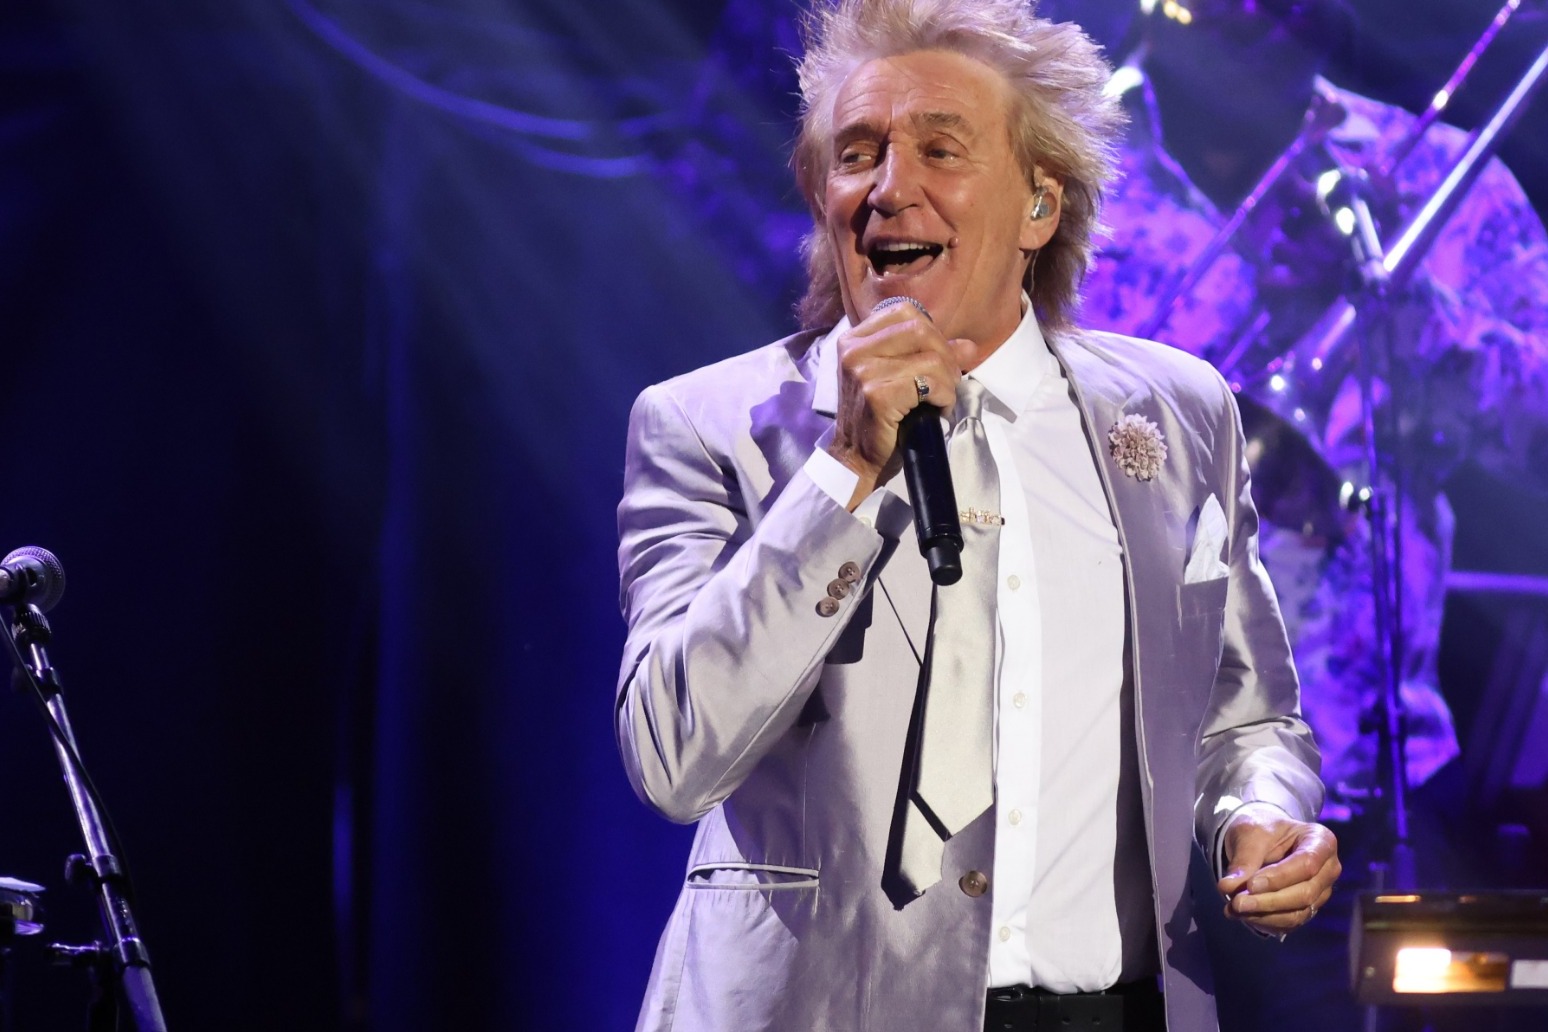 Sir Rod Stewart rents home for family of seven Ukrainian refugees 